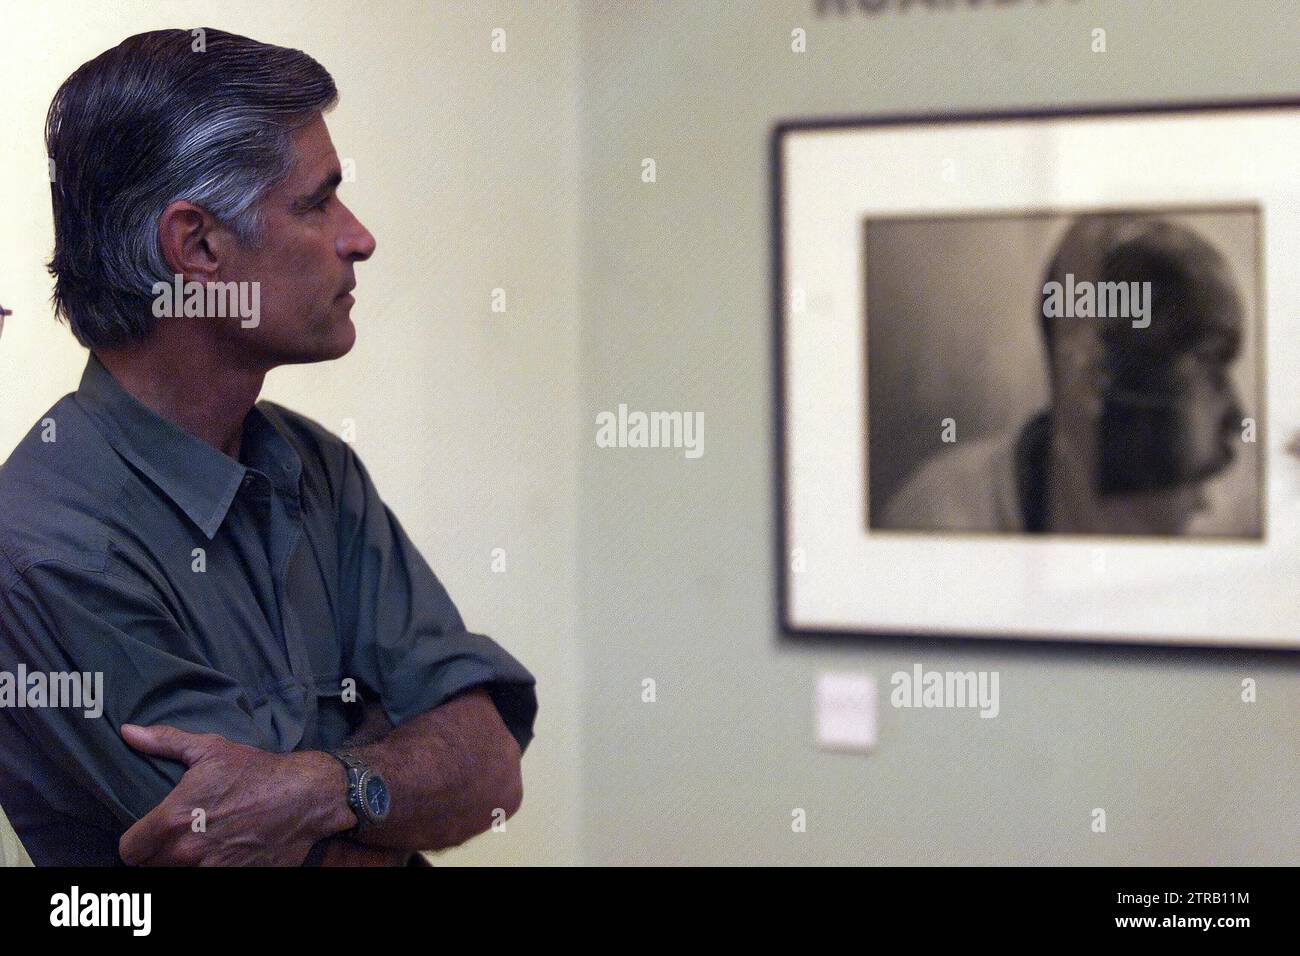 Madrid, 06/19/2000. The American photographer James Natchwey at the opening of the exhibition 'Testimony.' Photo: Chema Barroso. Archdc. Credit: Album / Archivo ABC / José María Barroso Stock Photo